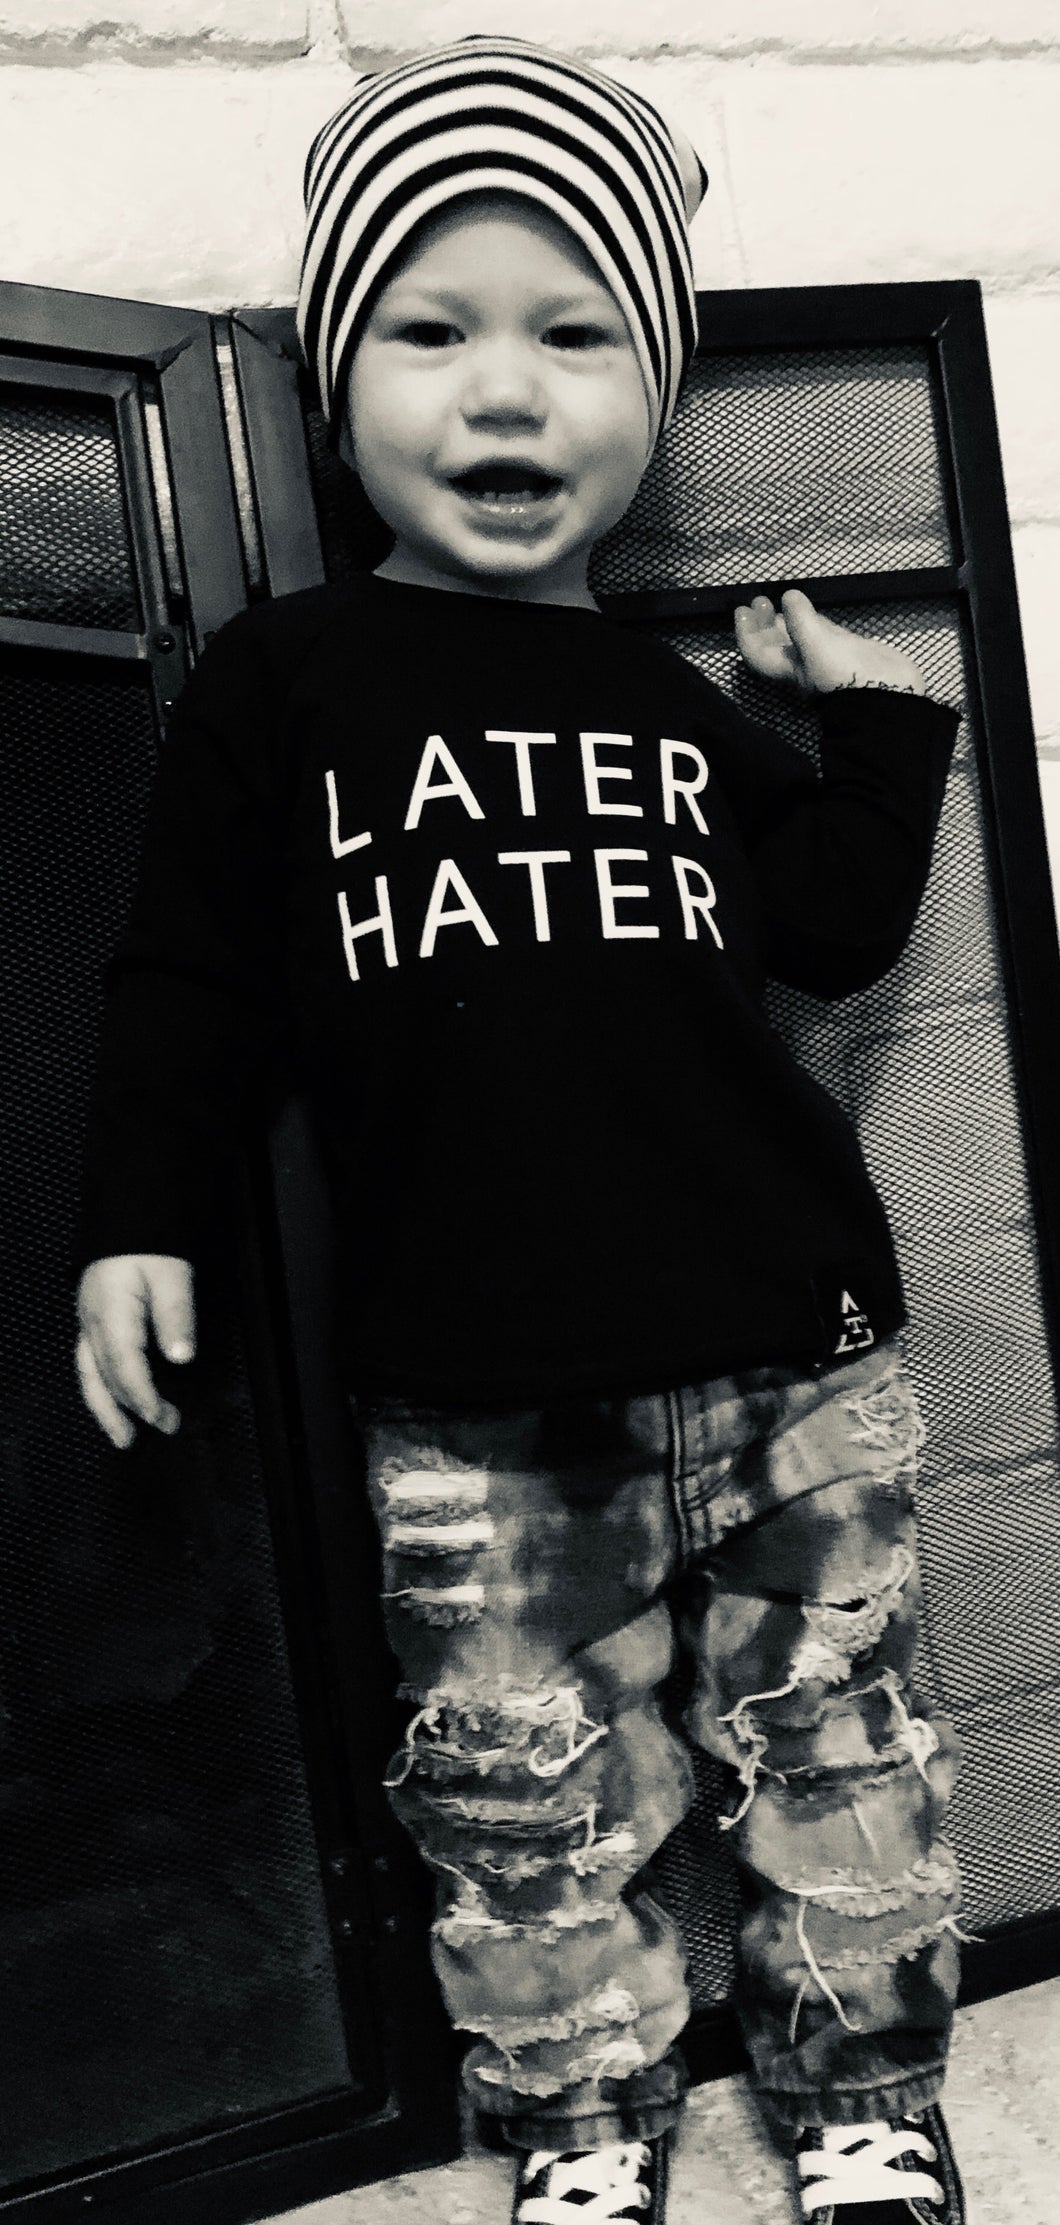 Later Hater